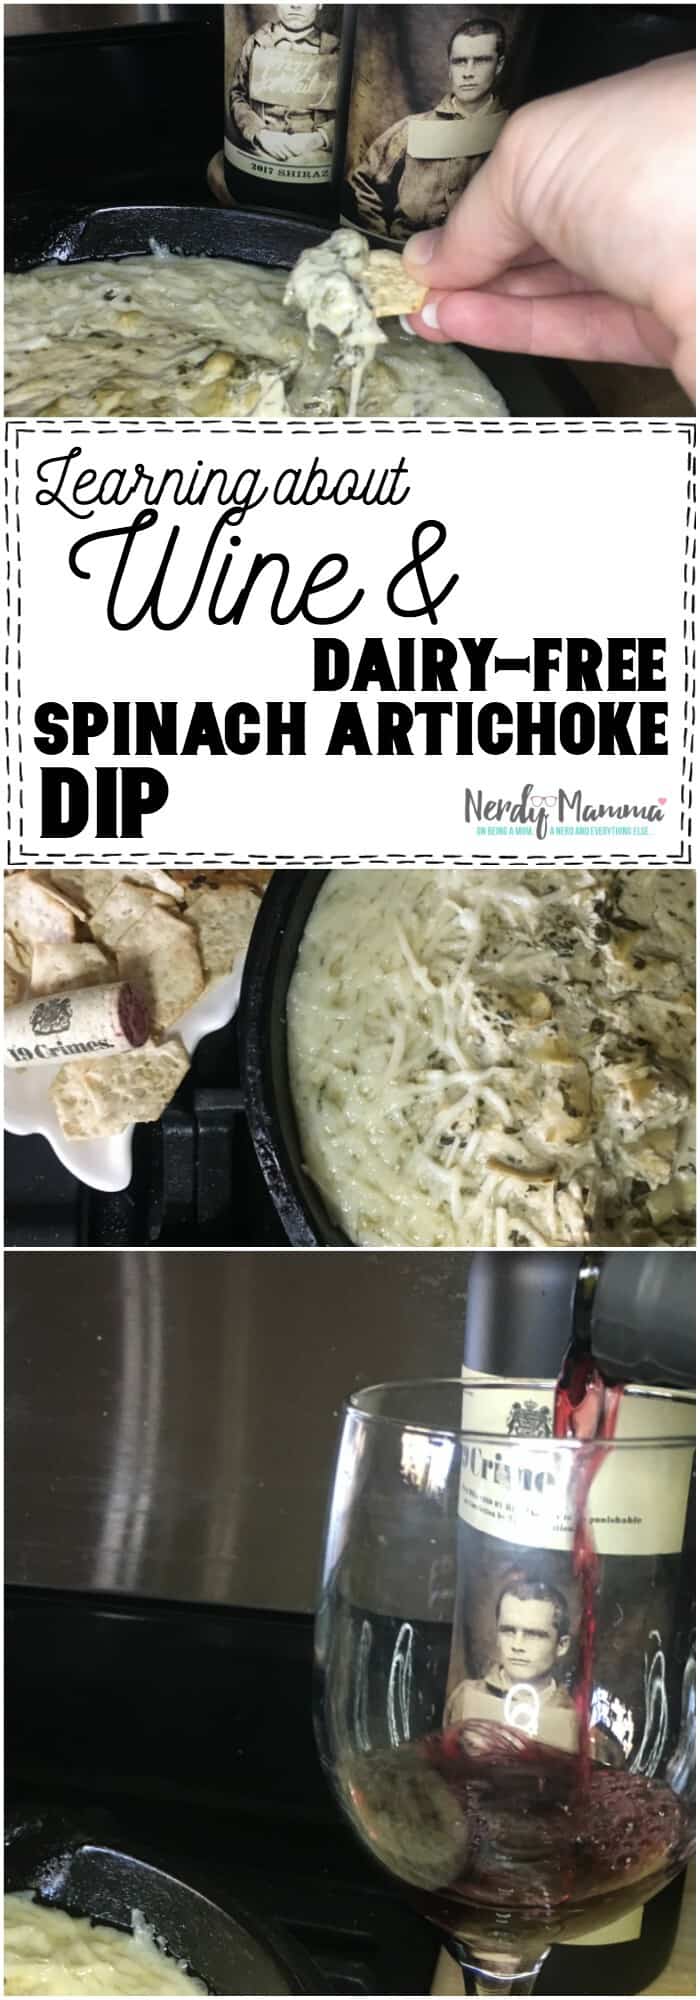 This is seriously the easiest dairy-free spinach artichoke dip recipe ever. And it's gluten-free. #recipe #glutenfree #diaryfree #vegan #recipe #veganrecipe #spinachartichokedip #dip #partyfood #party #allergyfriendly